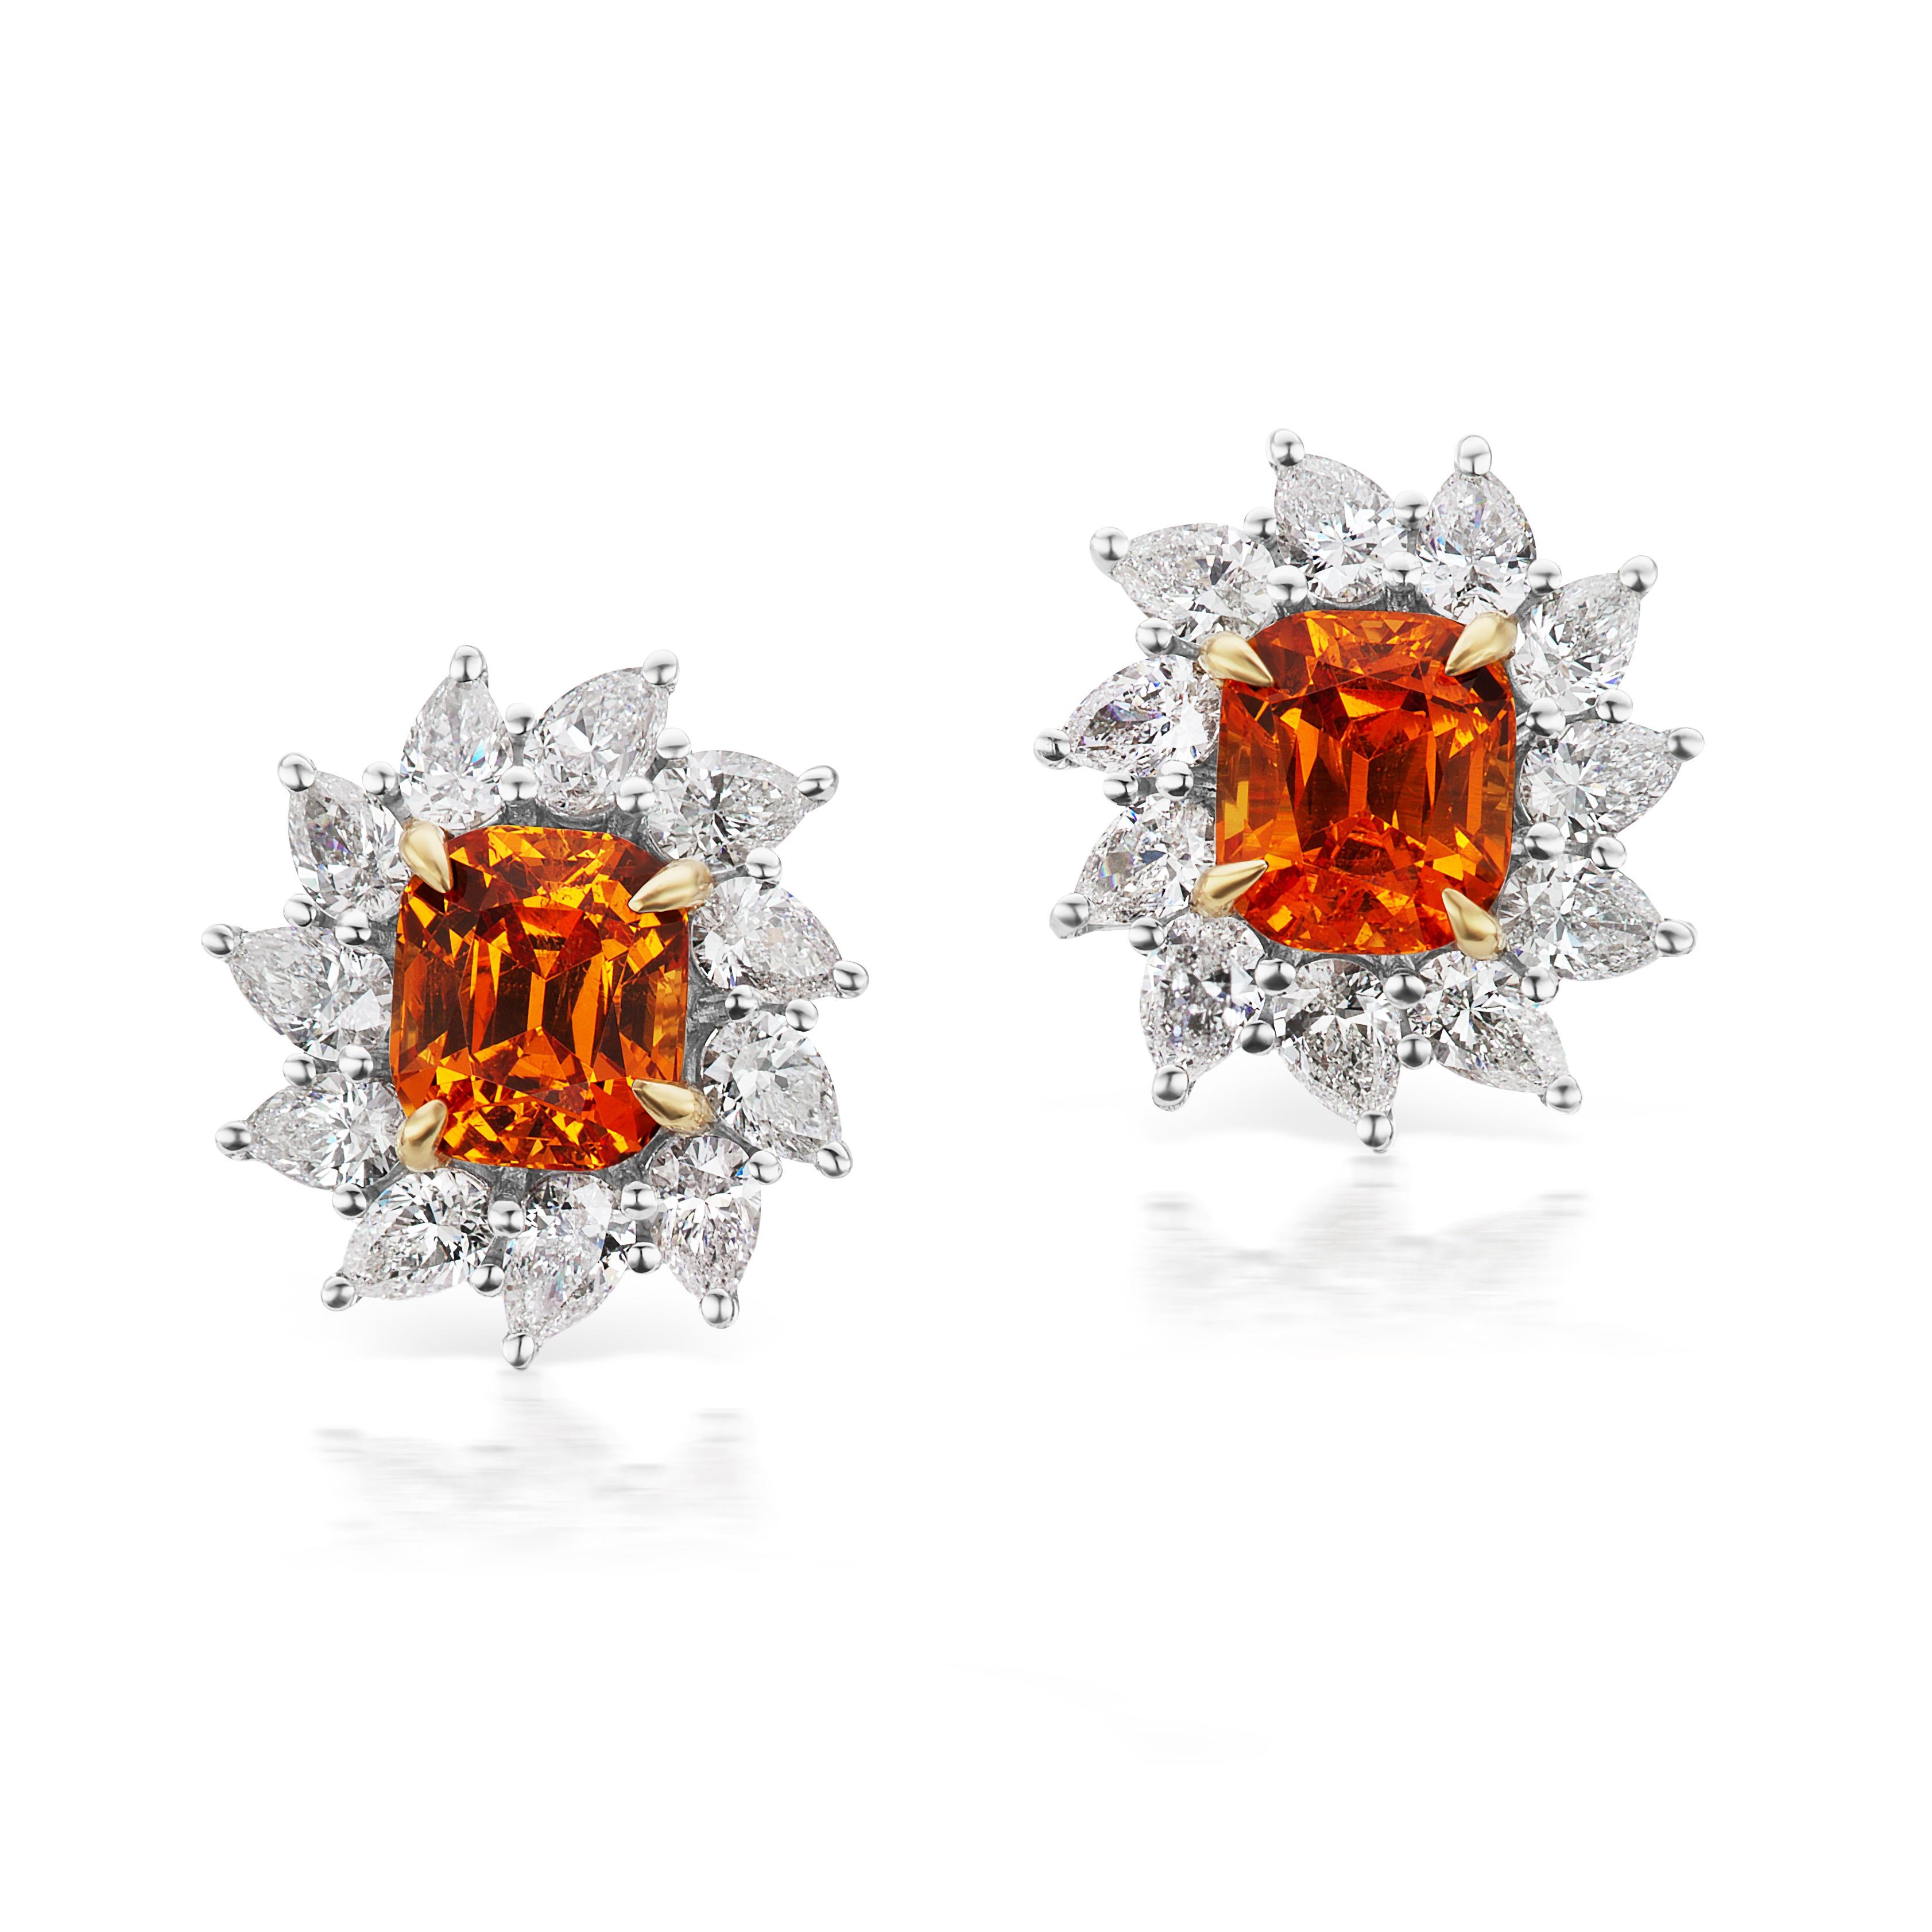 Phoenix Crown Earrings:
These earrings dance like a flame with a sexy fringe of gems. Wear them 3 ways for a day to night look.

The Design:
These dramatic earrings play with fire: flame colored spessartite garnets and orange sapphires glow with